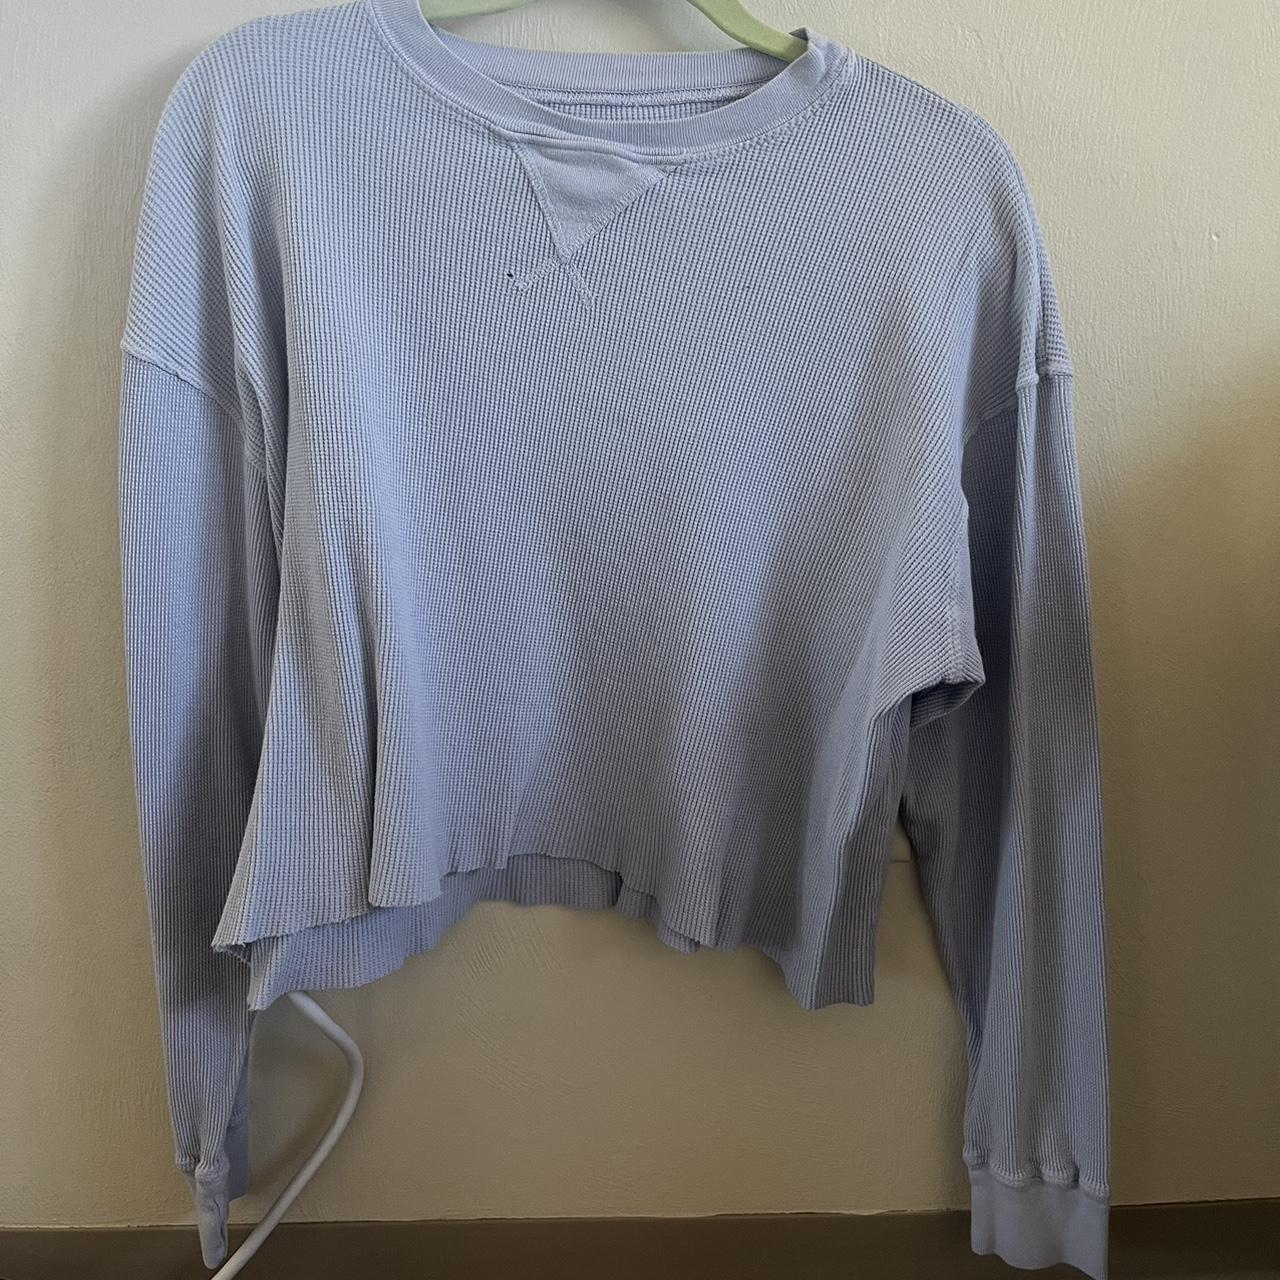 brandy sweater worn a lot small hole in 4th picture - Depop